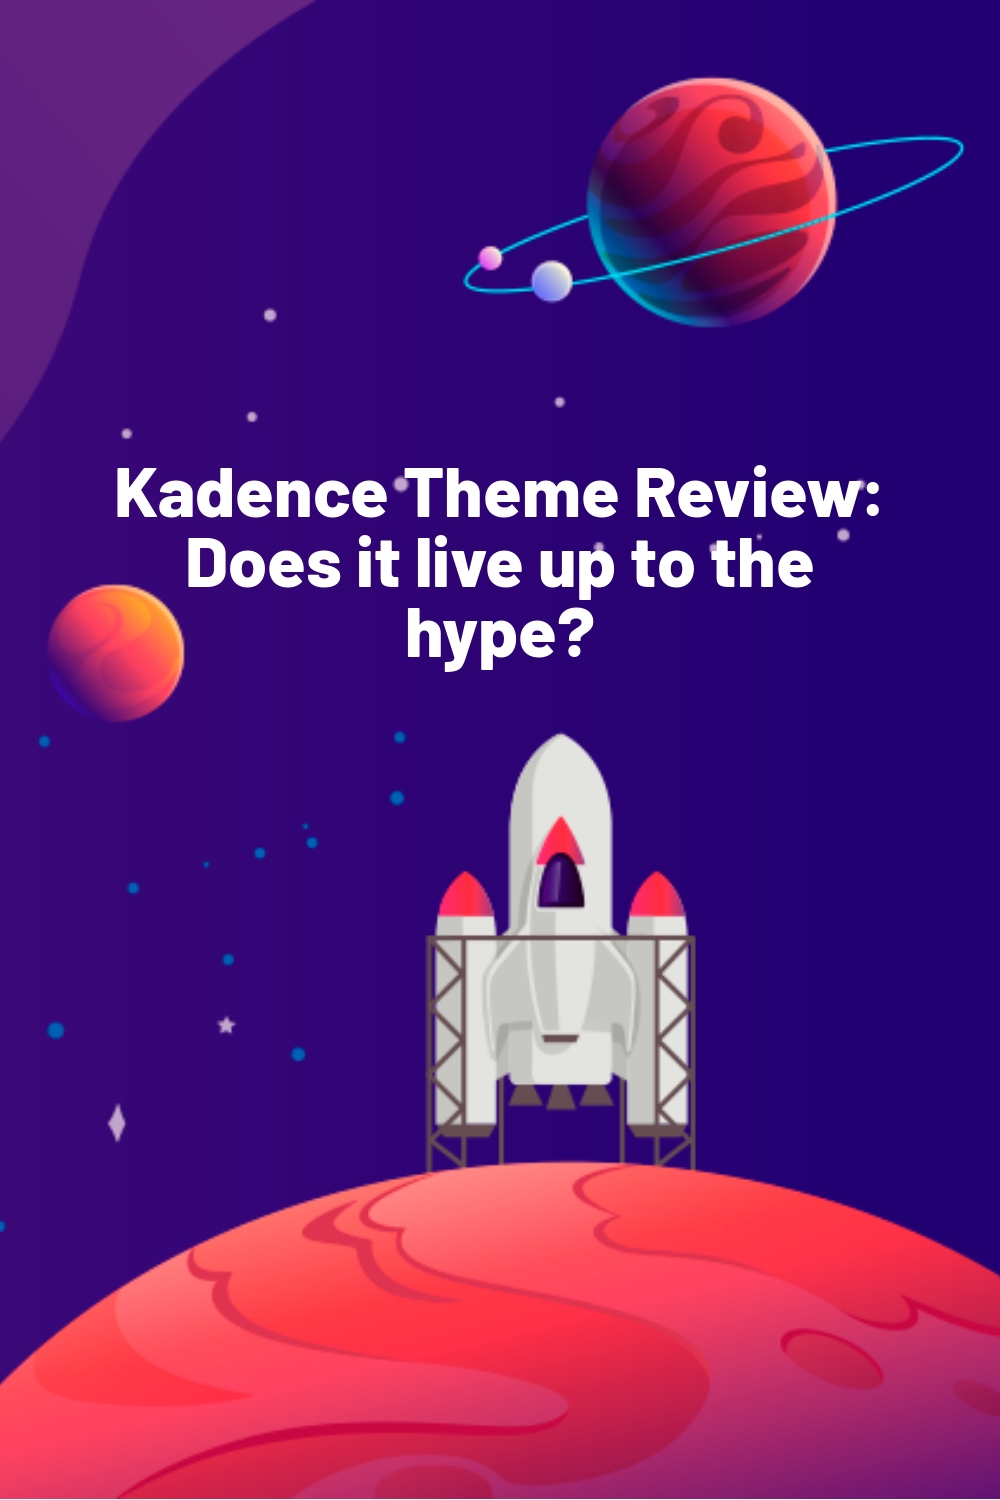 Kadence Theme Review: Does it live up to the hype?